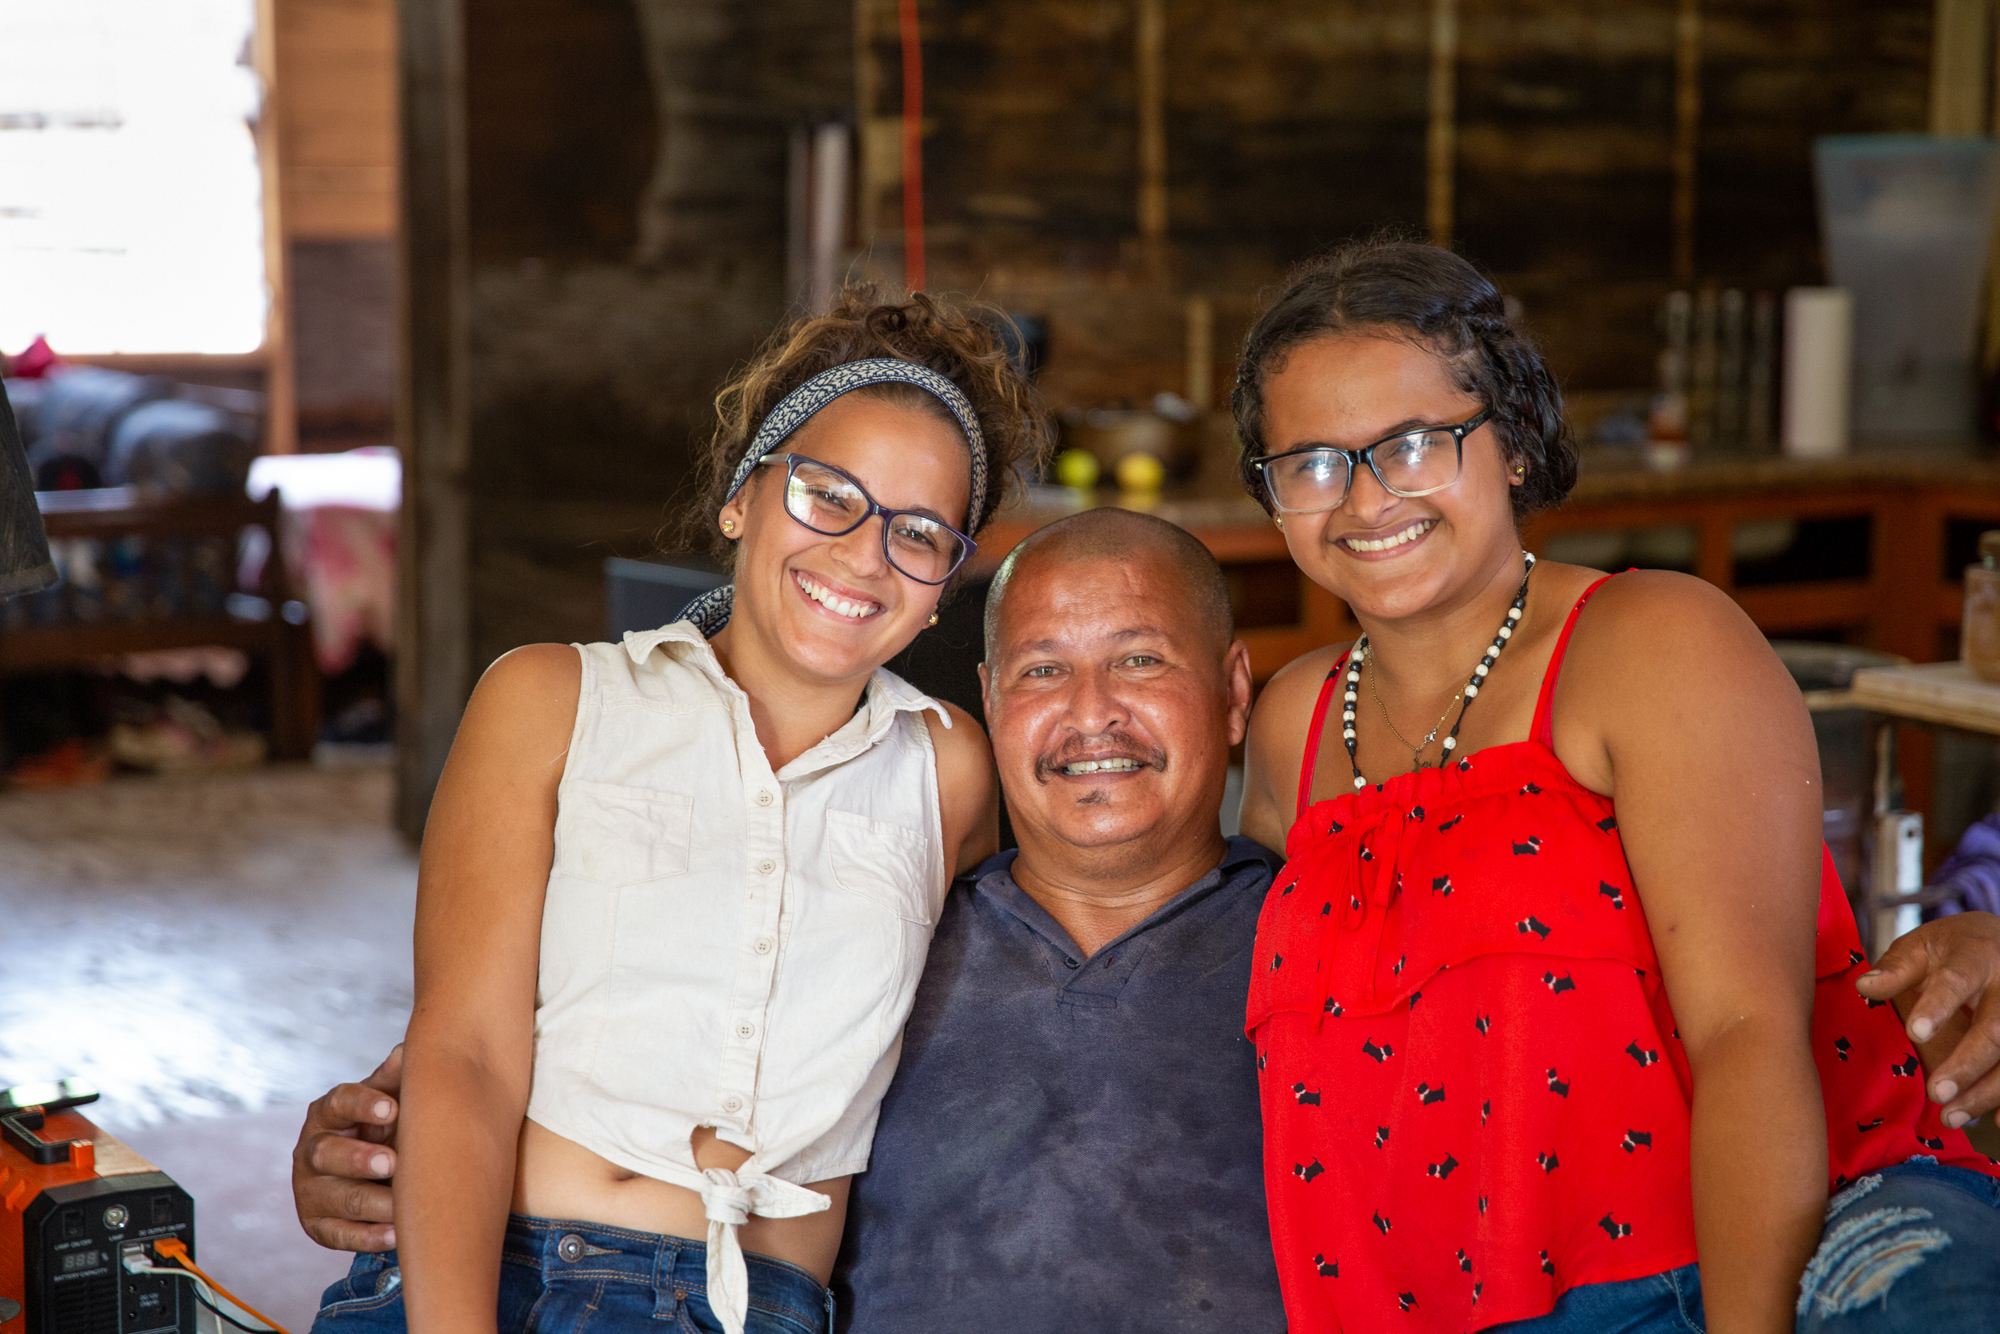 Roberto Cornier and family - Roberto Cornier had 11 strokes in 2017 and was evicted from his home in Peñuelas, Puerto Rico, after Hurricane Maria. His daughters Kenaisha, 21 (left), and Gabriela, 15, took him to the hospital and found a new place for the family to stay – a derelict, abandoned school. (Ellen O'Brien/News21)